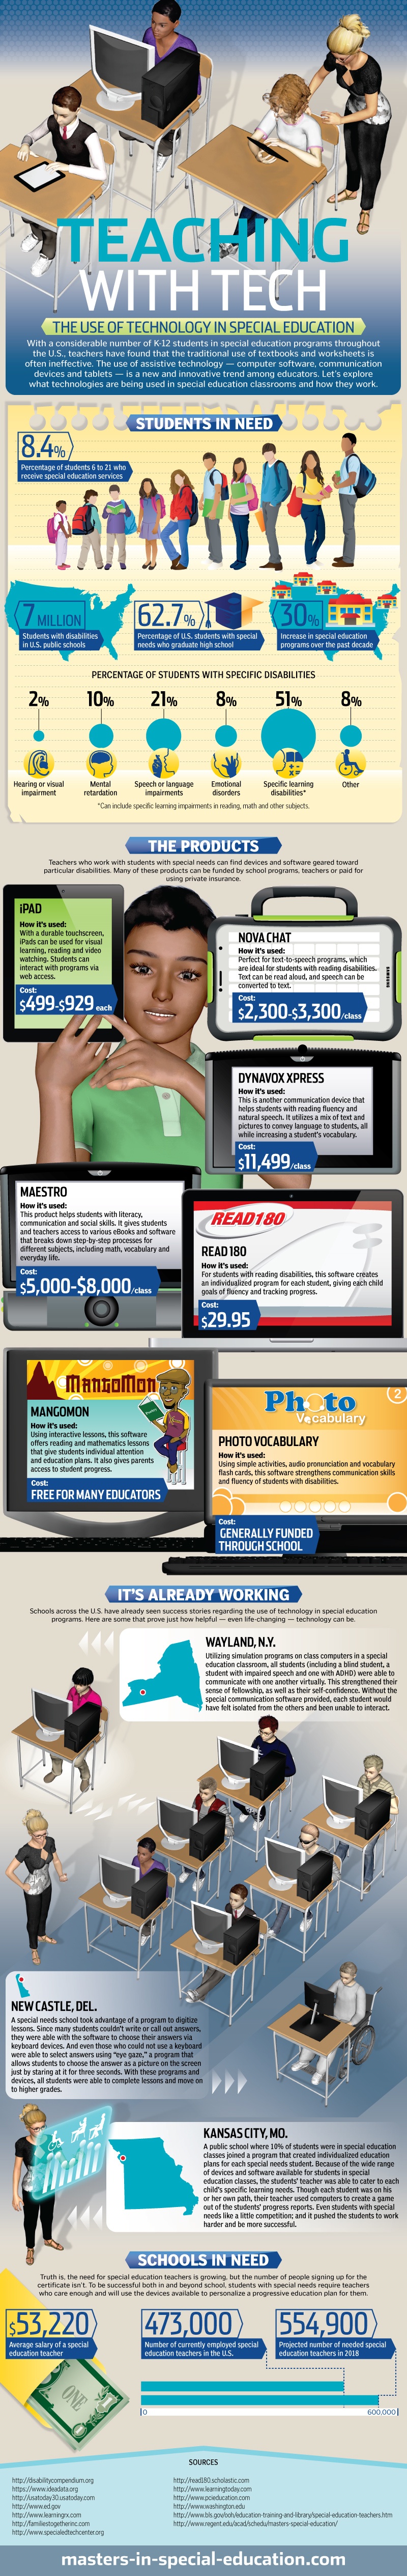 The Use of Technology in Special Education Infographic